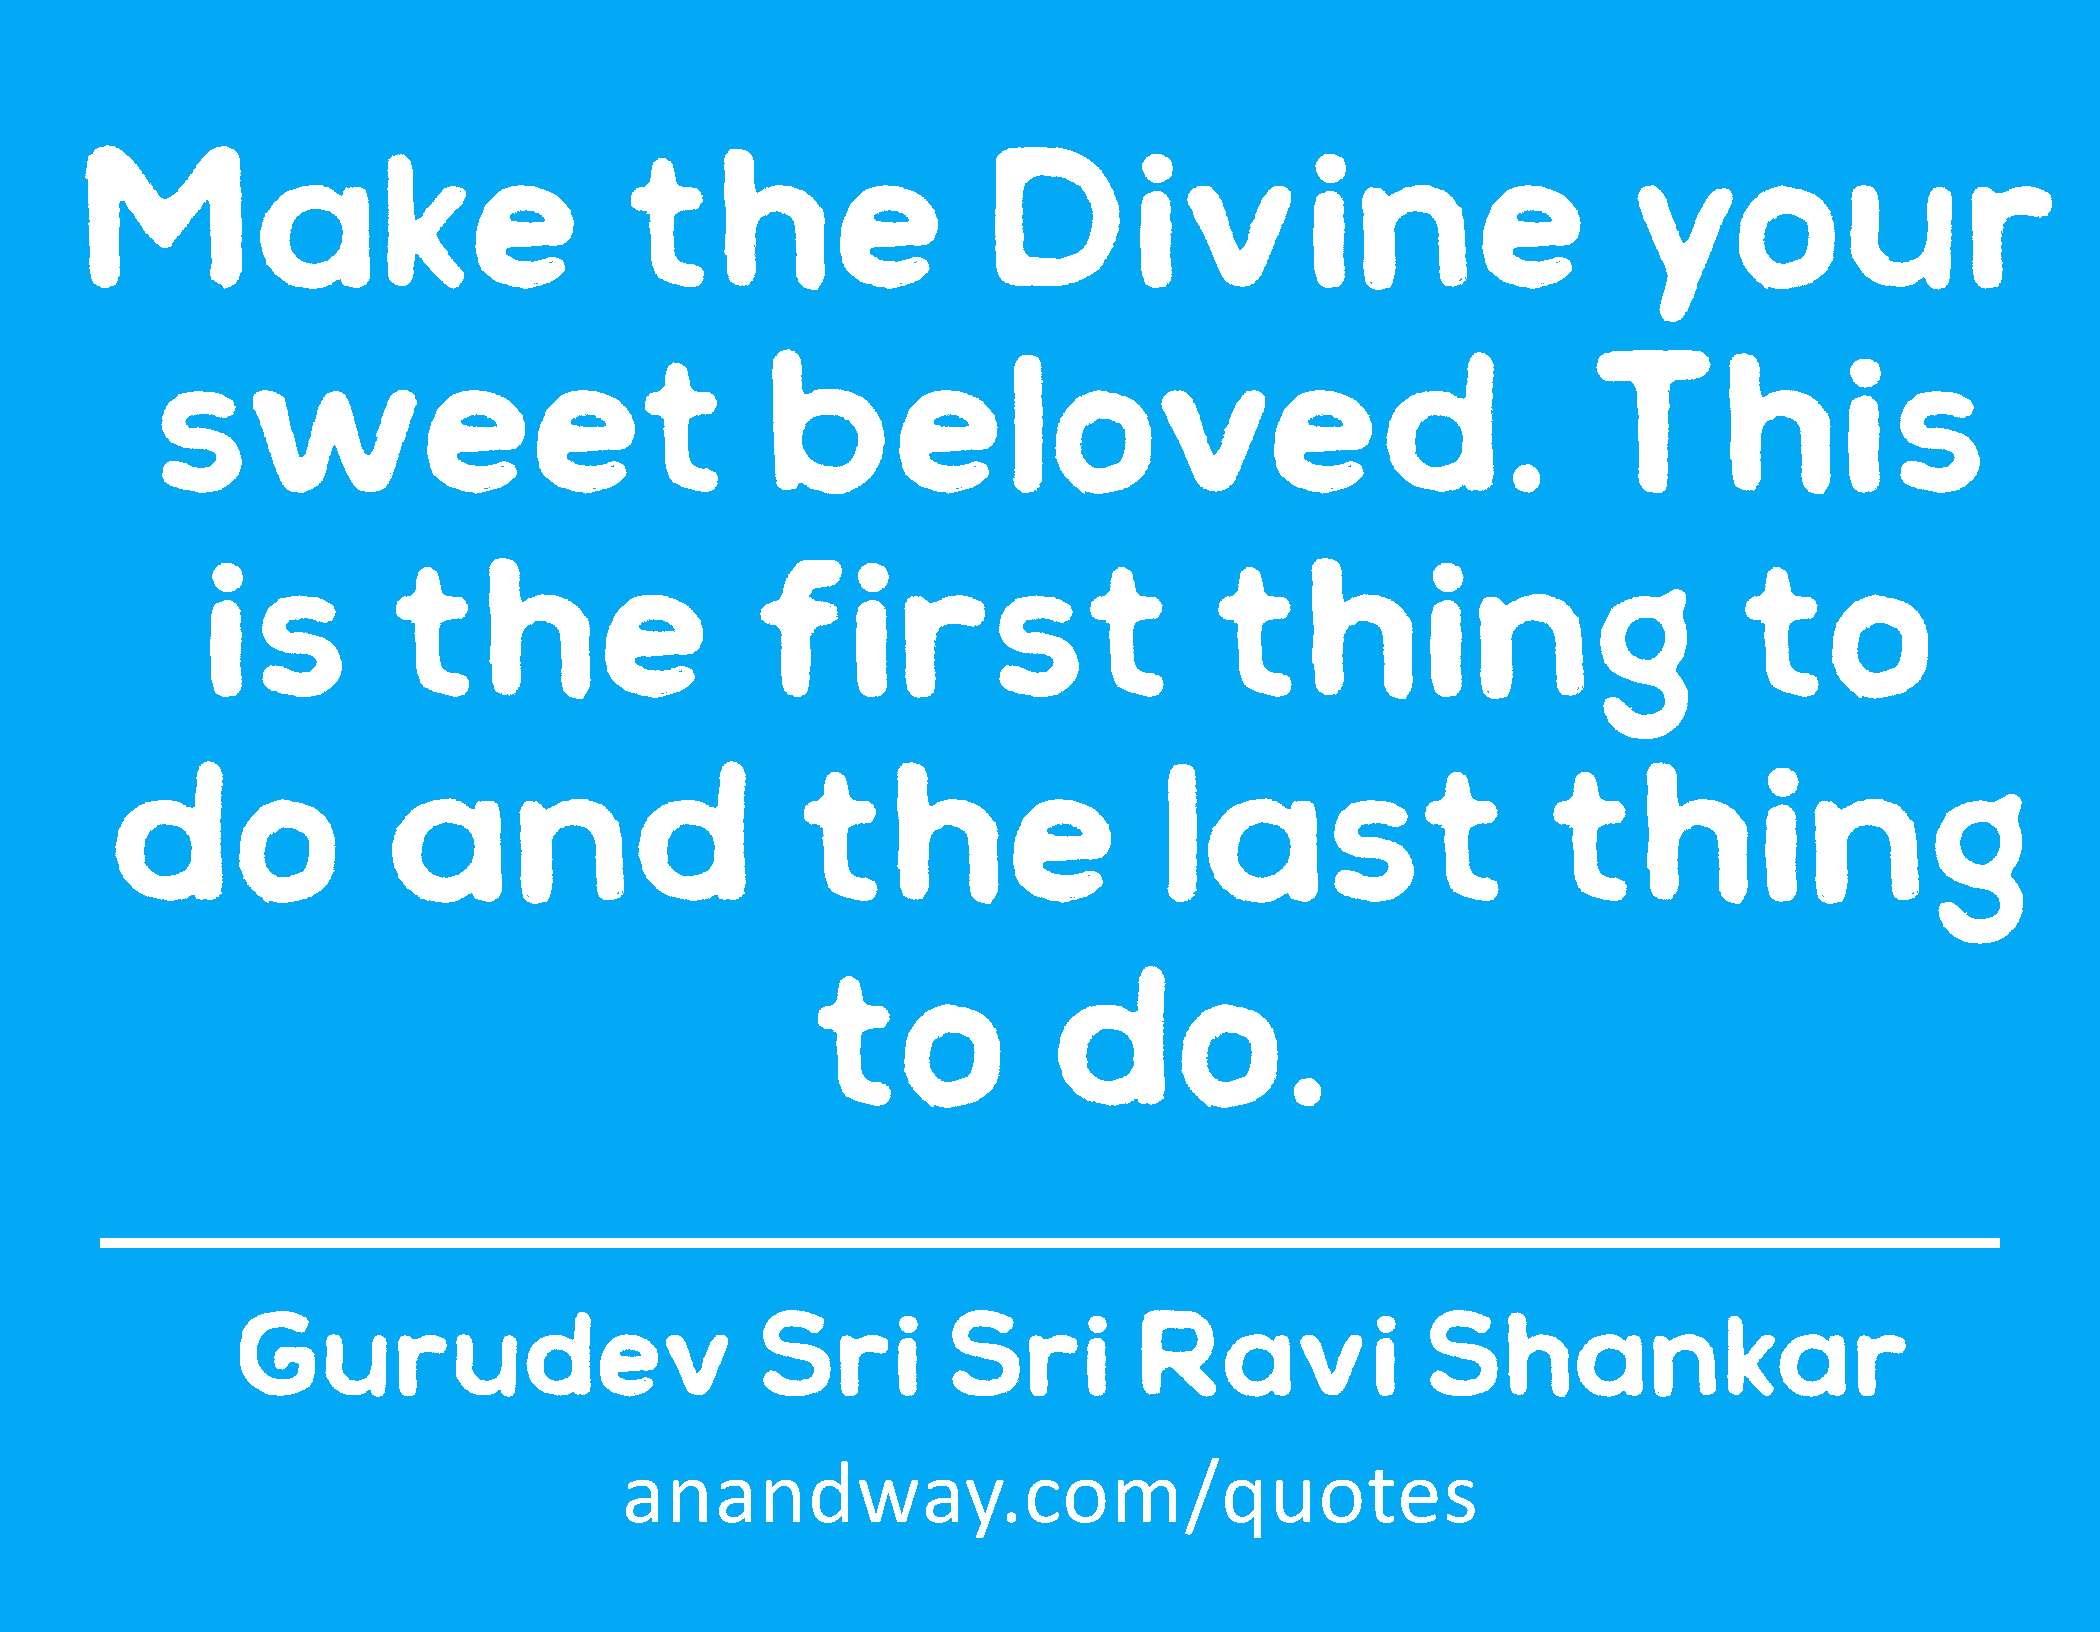 Make the Divine your sweet beloved. This is the first thing to do and the last thing to do. 
 -Gurudev Sri Sri Ravi Shankar